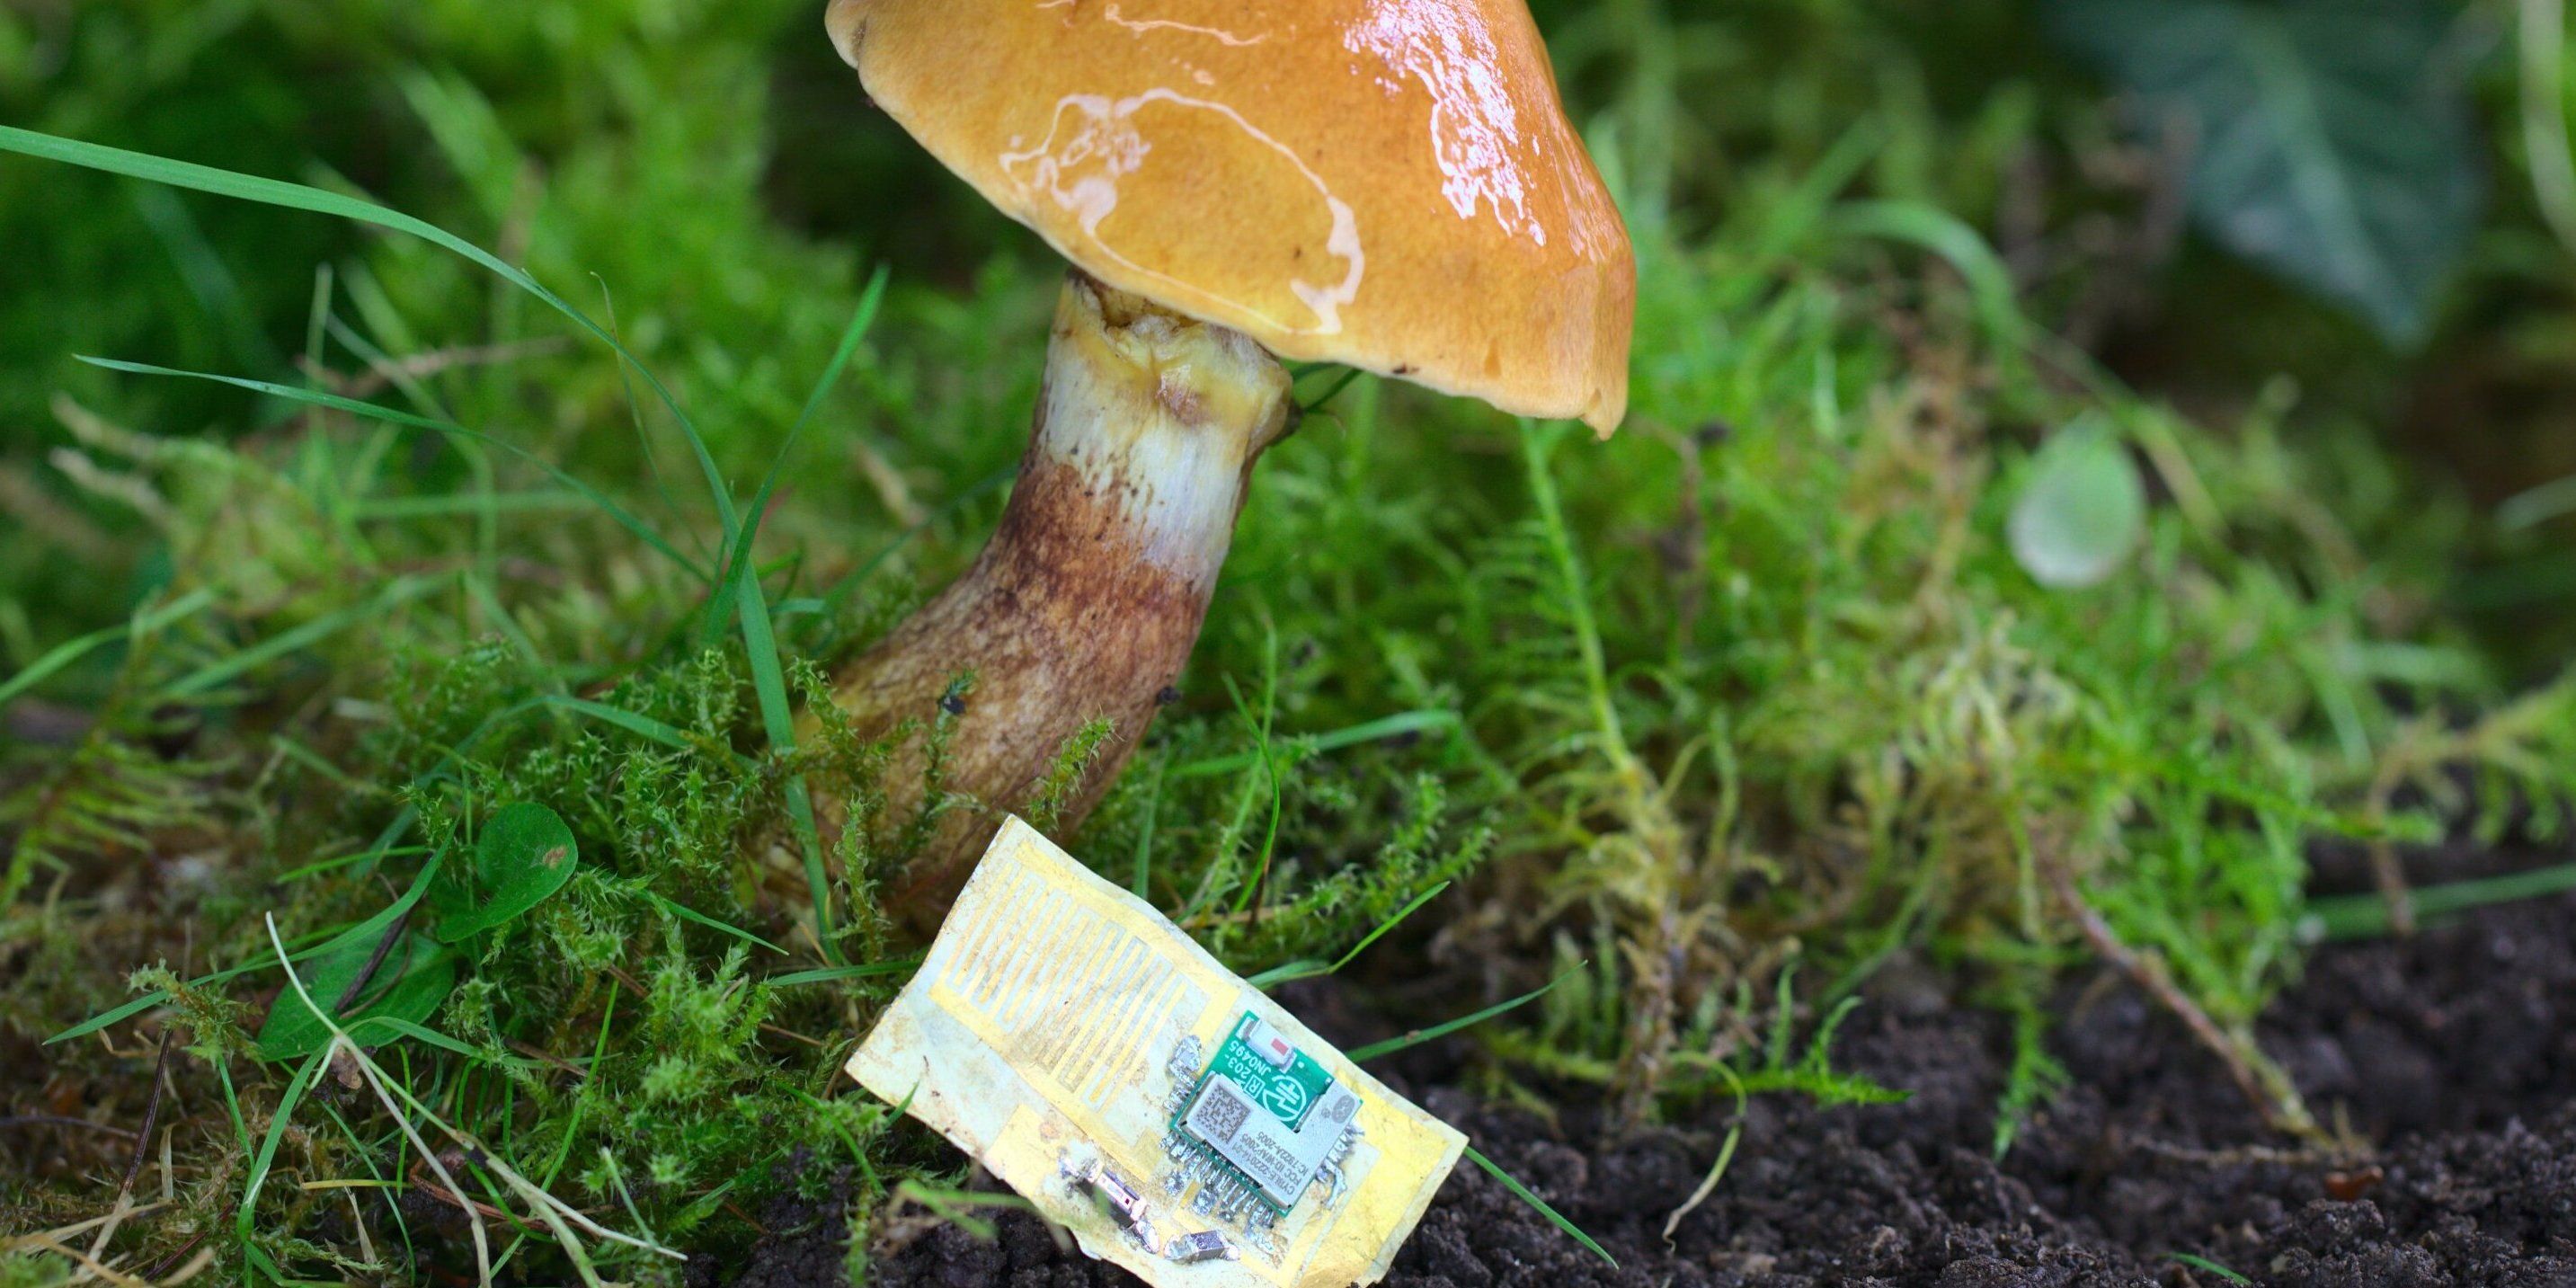 A circuit board made from dried mushroom skin is pictured laying in dirt and grass beside a yellowish brown mushroom